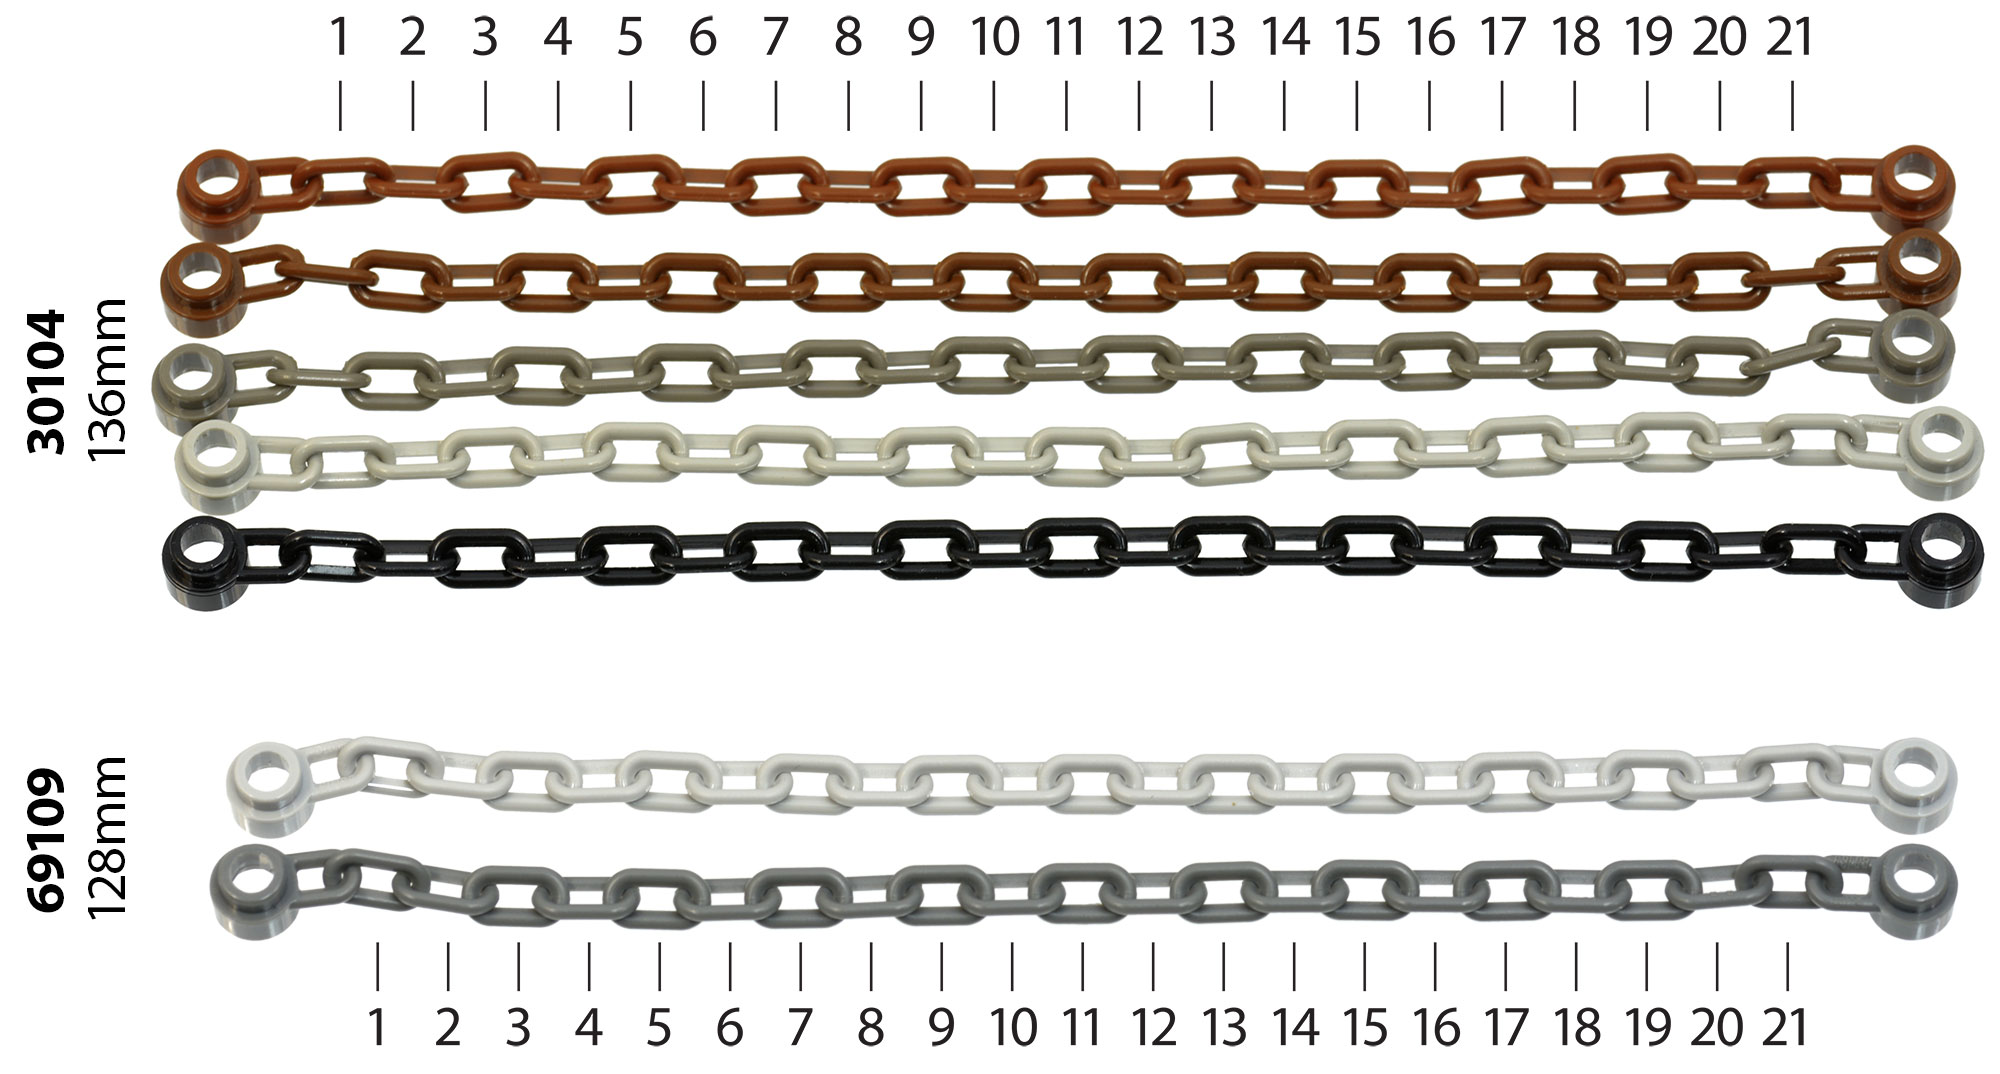 chains compared